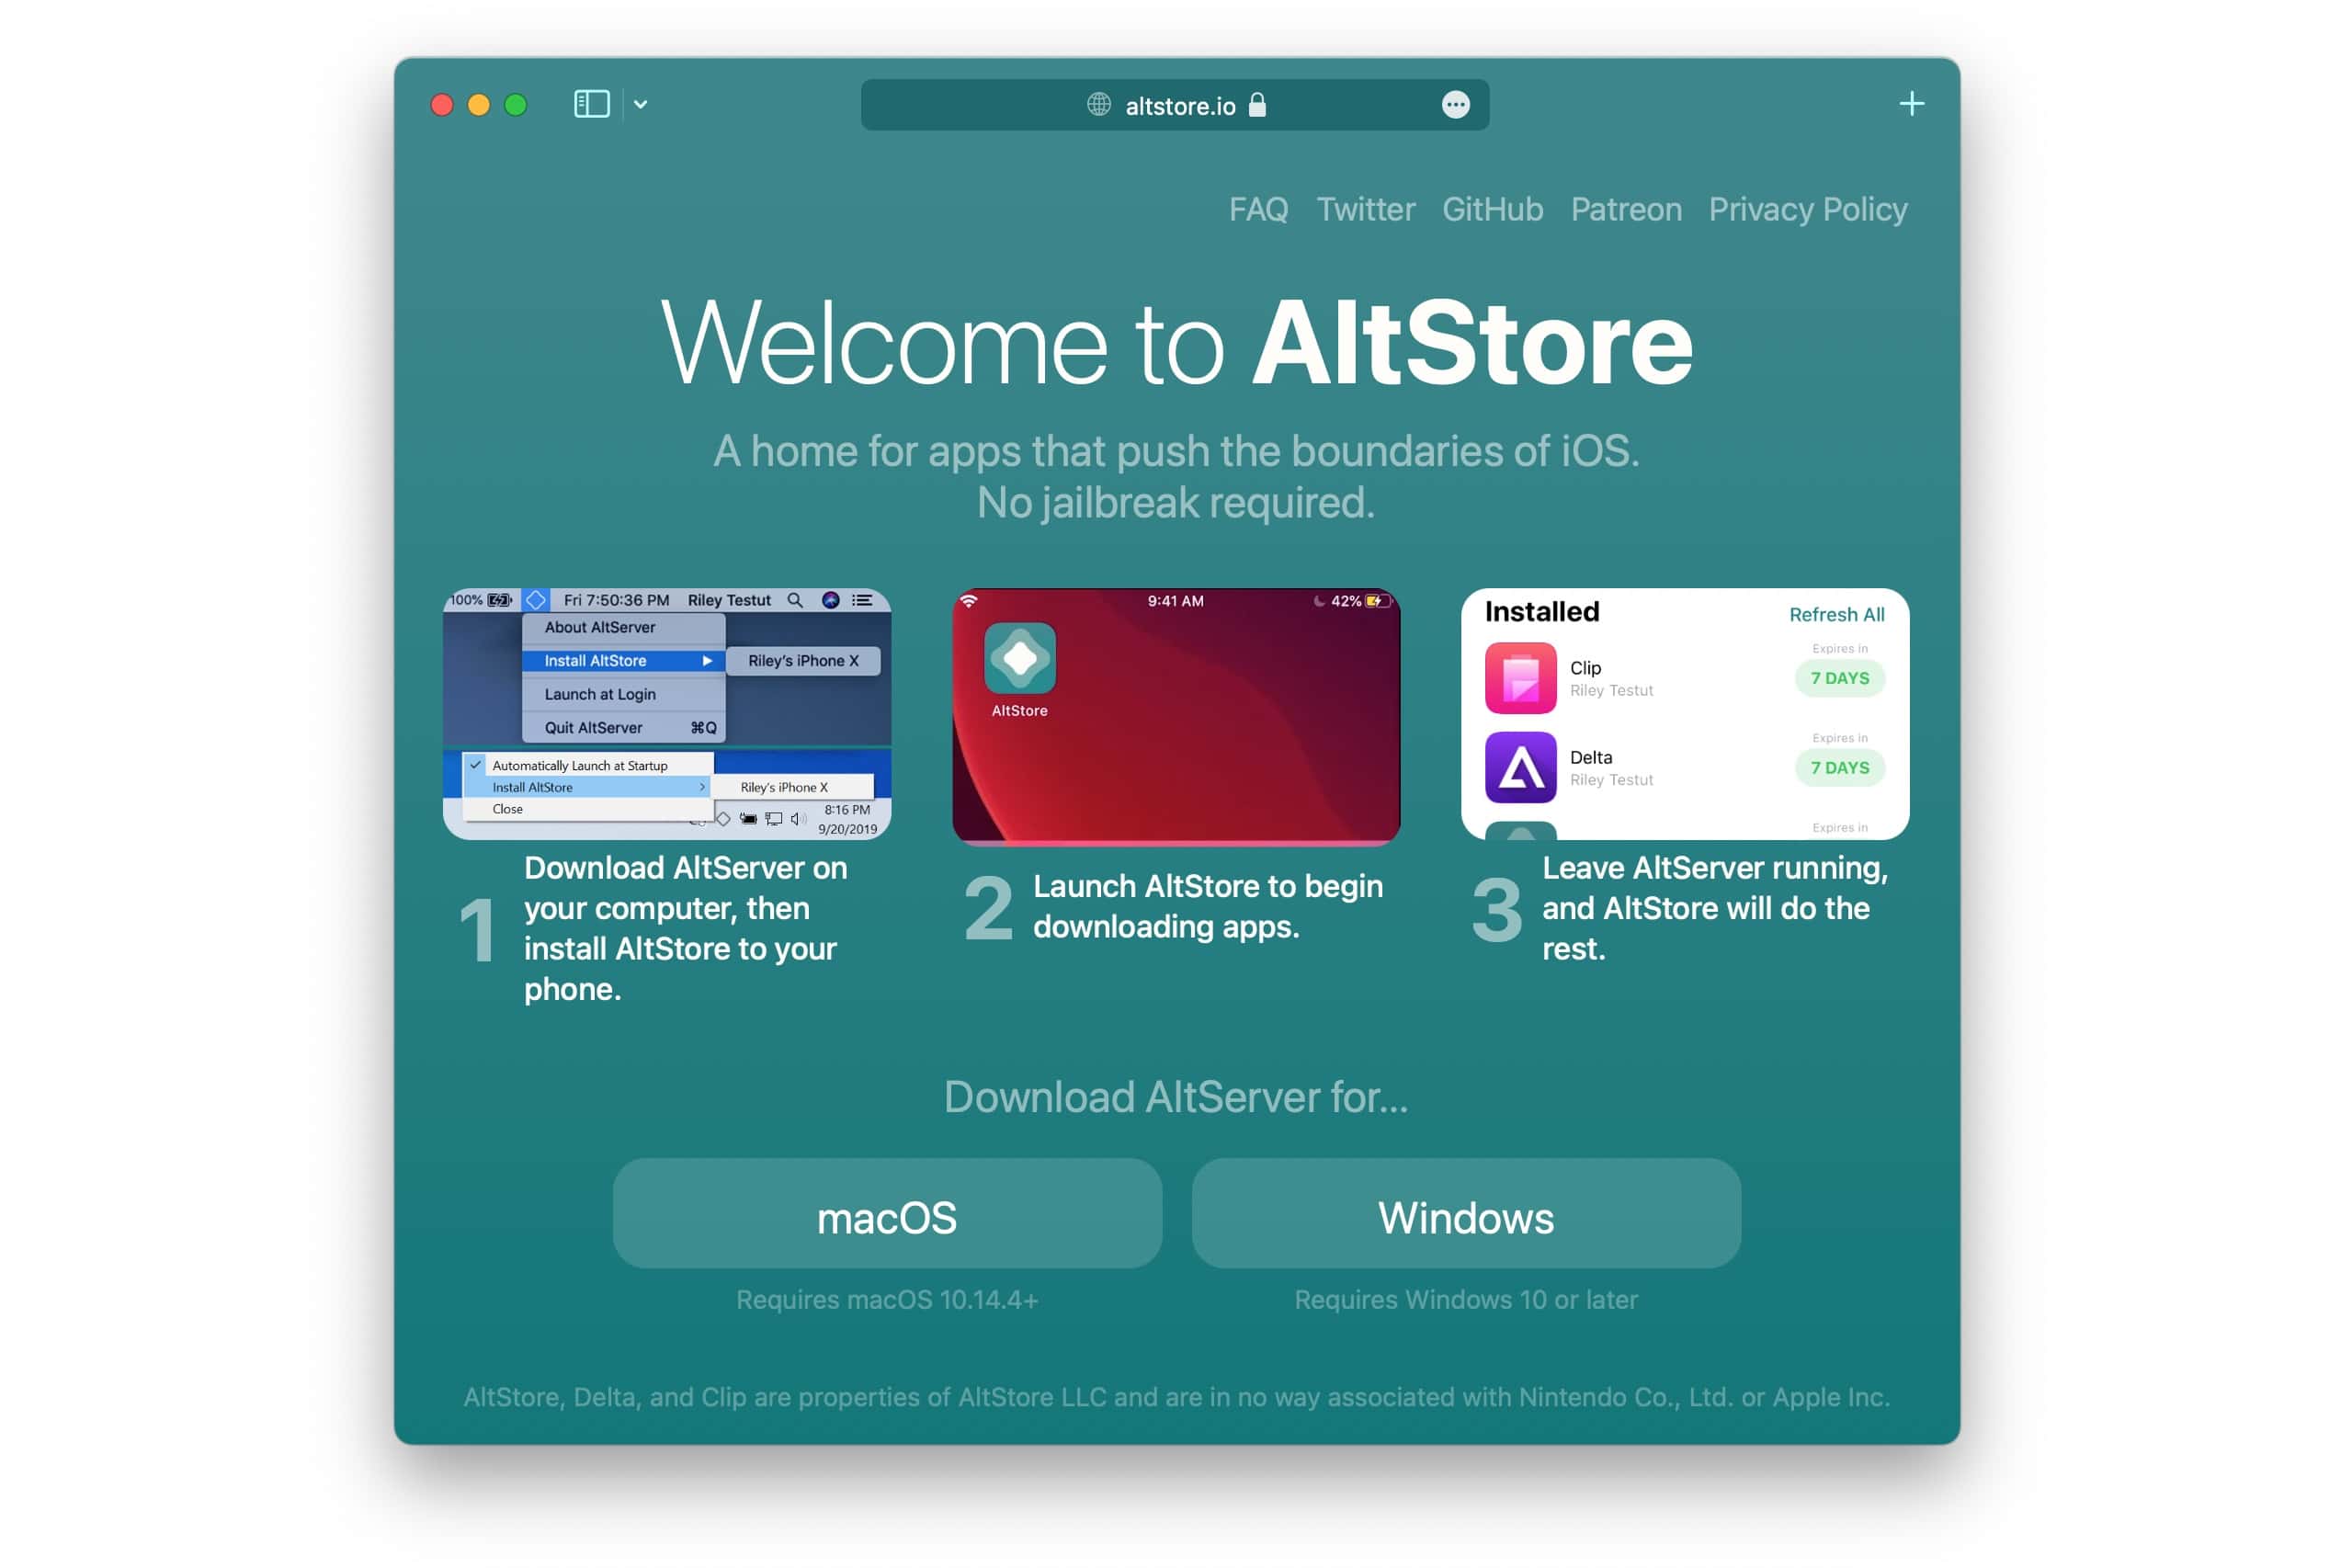 Get emulators, clipboard history and other banned apps on your iPhone without jailbreaking: Download AltStore from altstore.io.